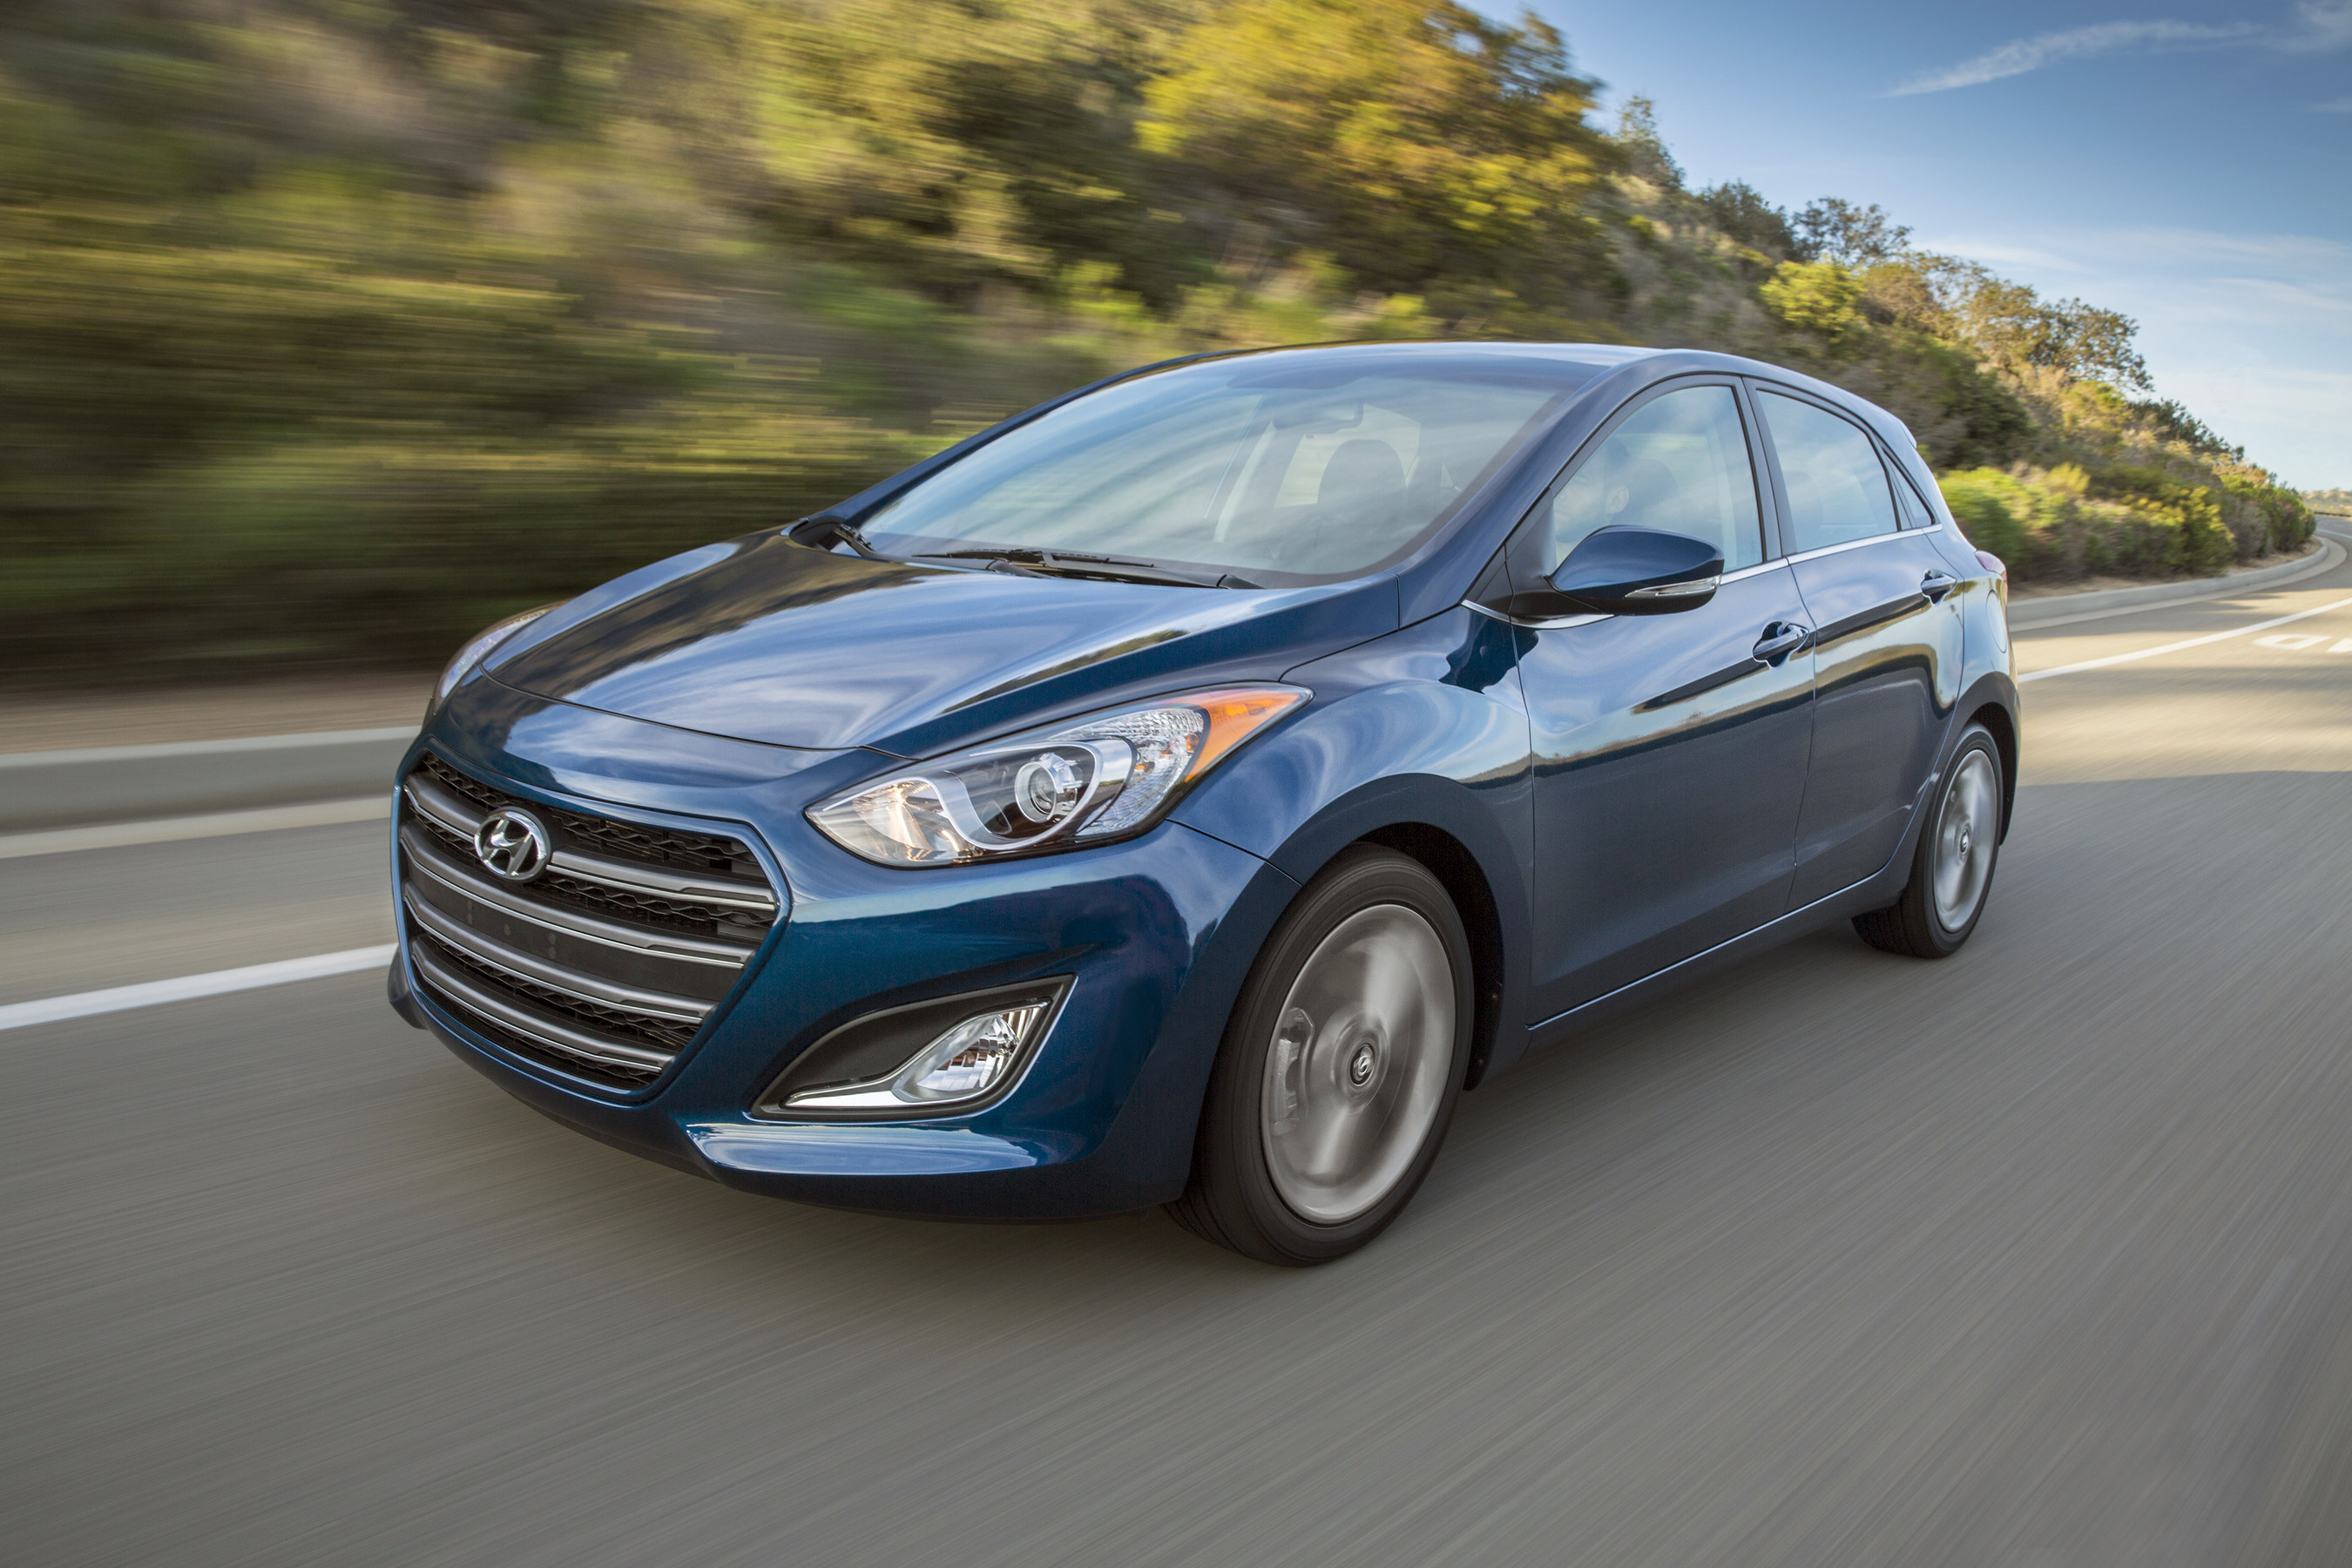 2016 Hyundai Elantra GT Sports Refreshed Look and New Tech